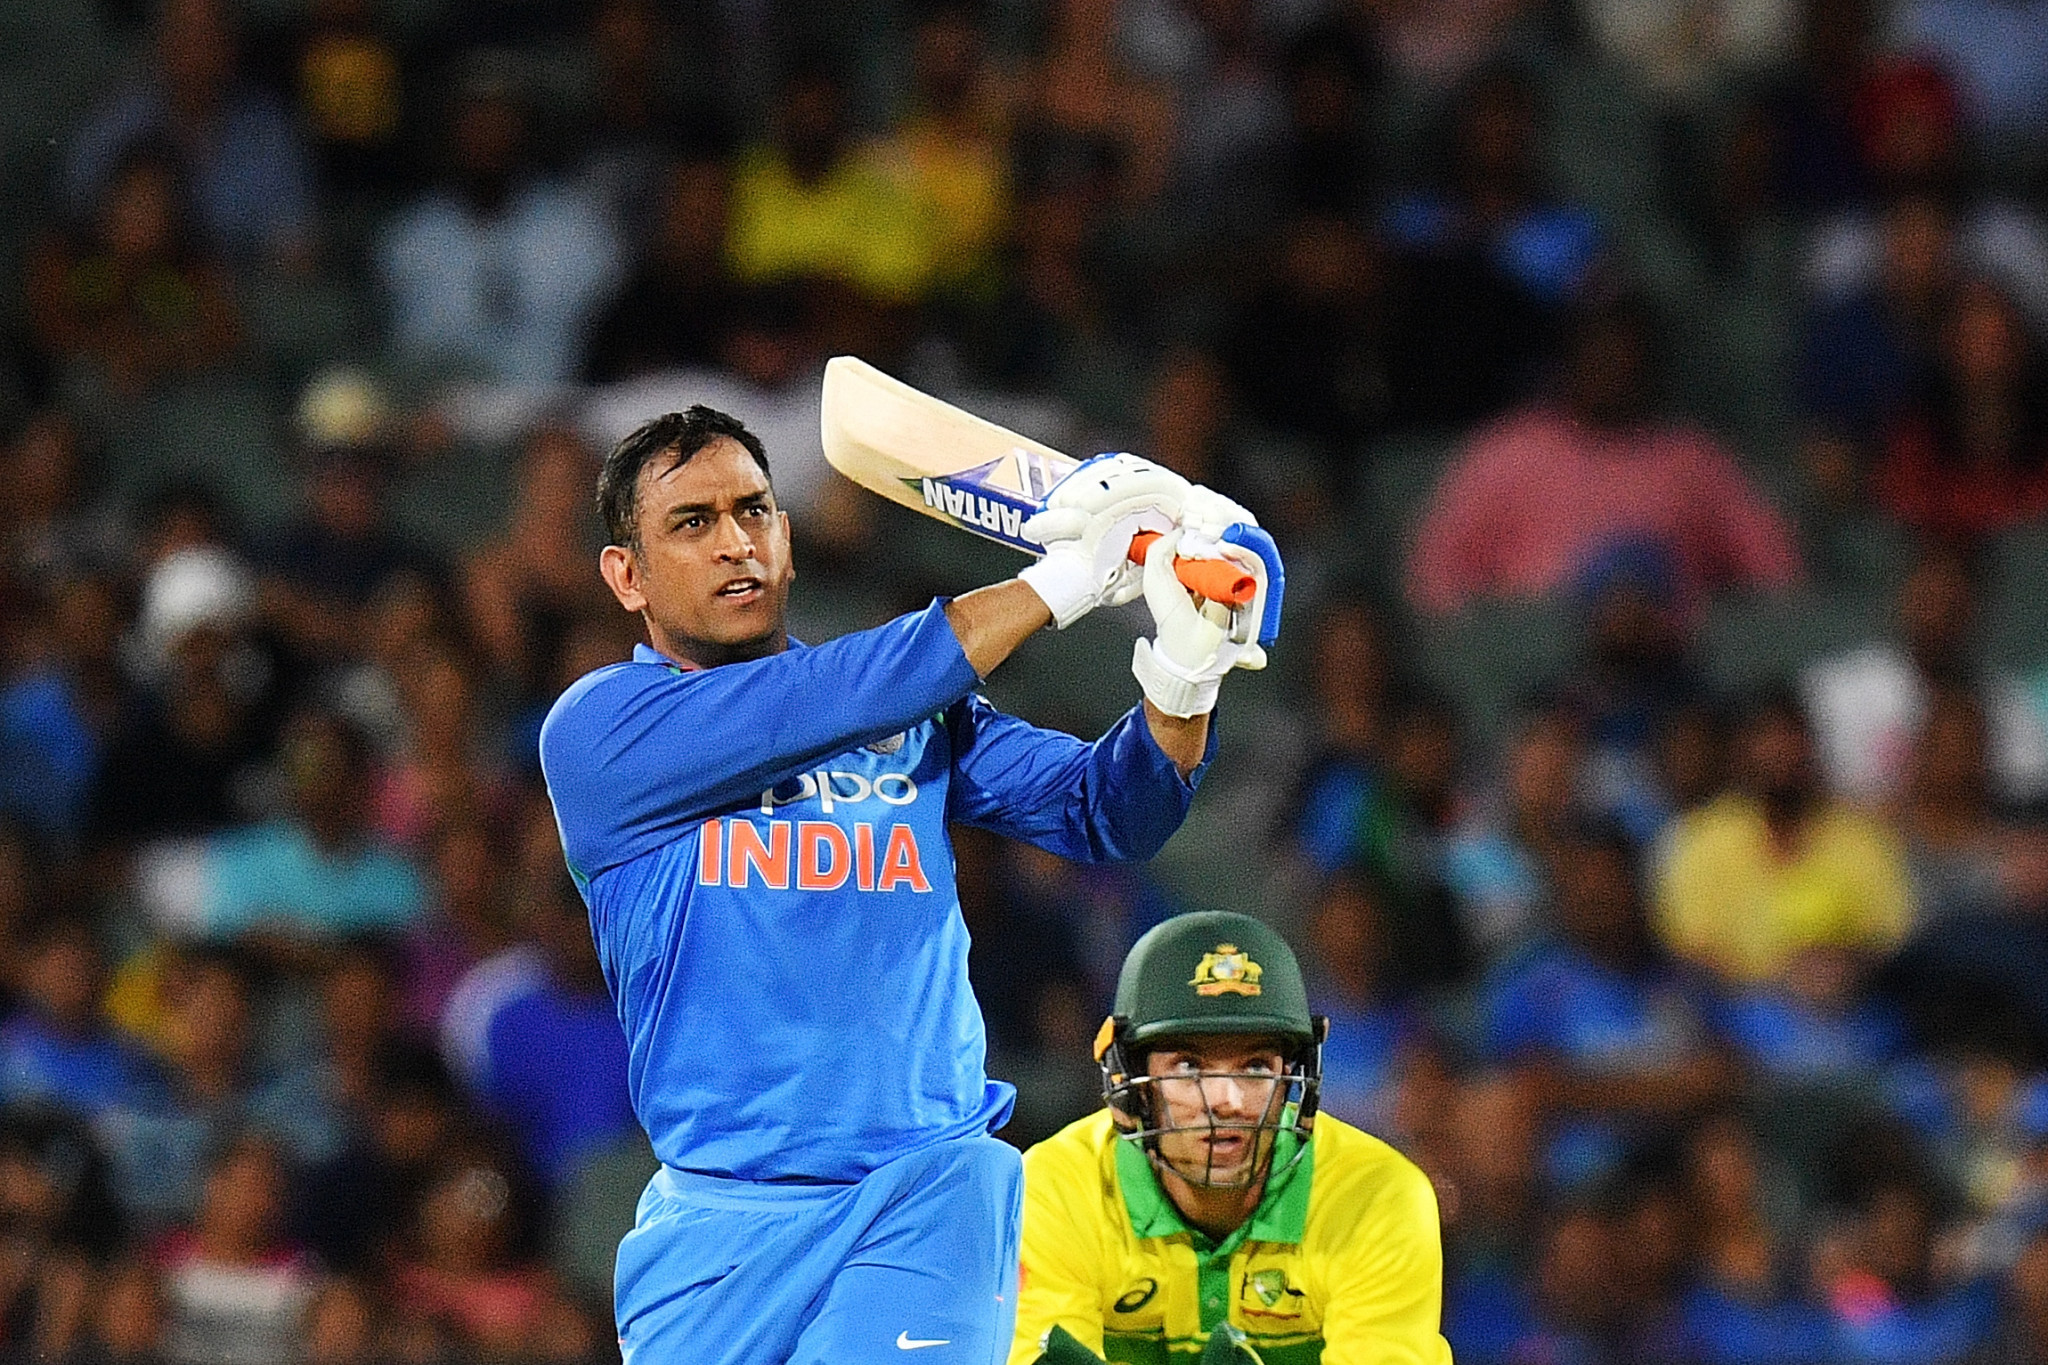 India legend and World Cup winner Dhoni retires from international cricket